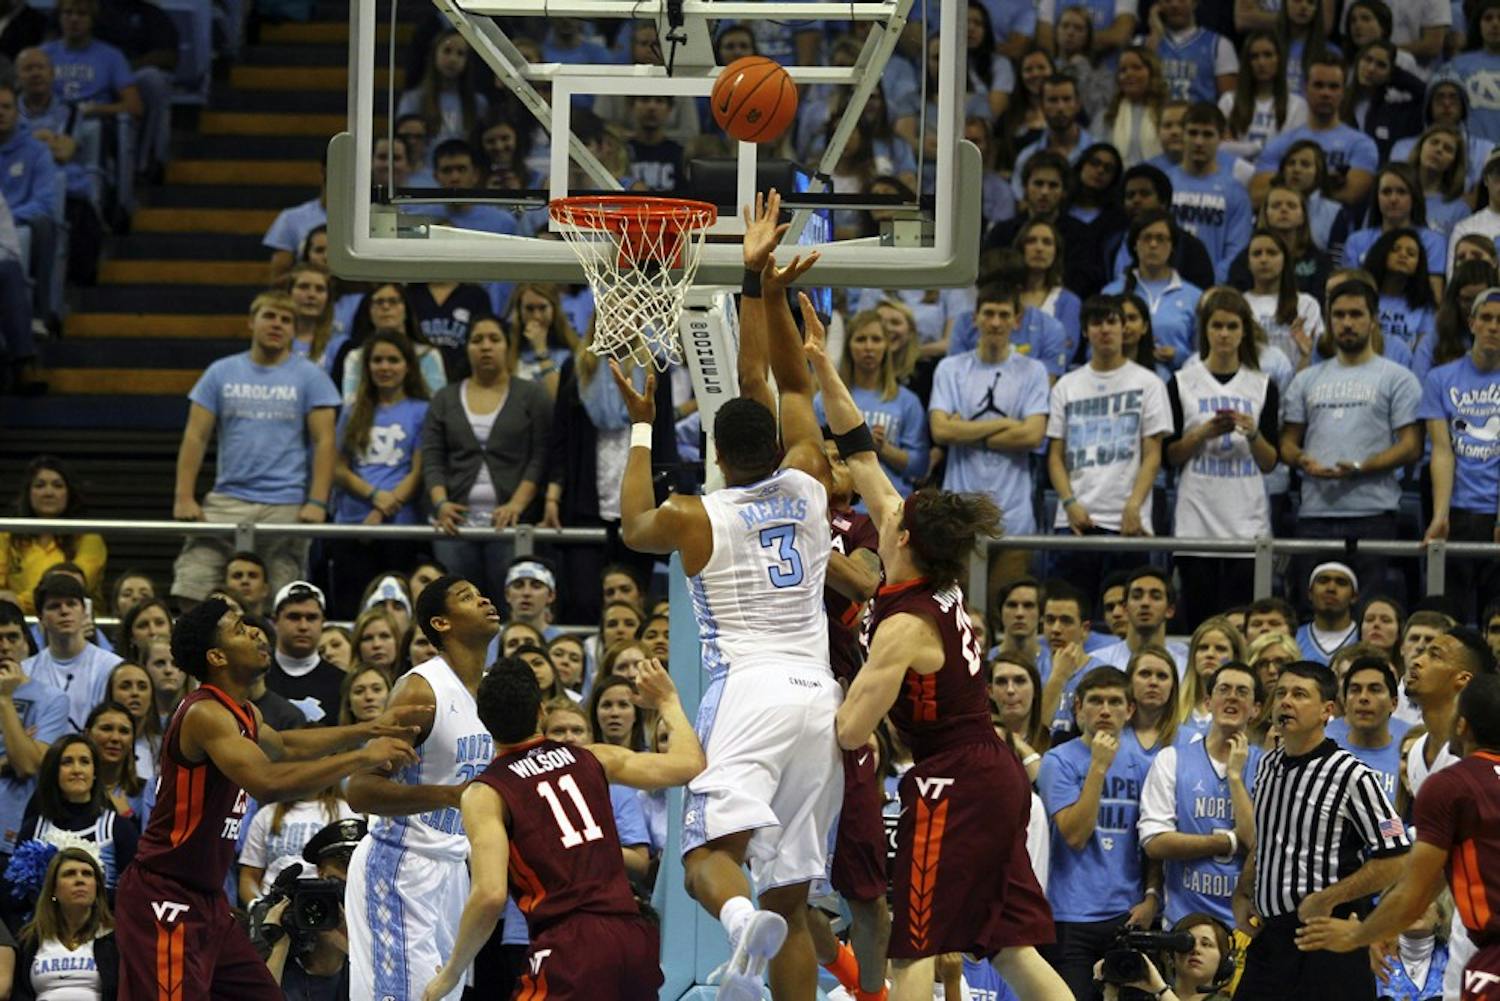 UNC sophomore forward Kennedy Meeks (3) goes up for a layup.